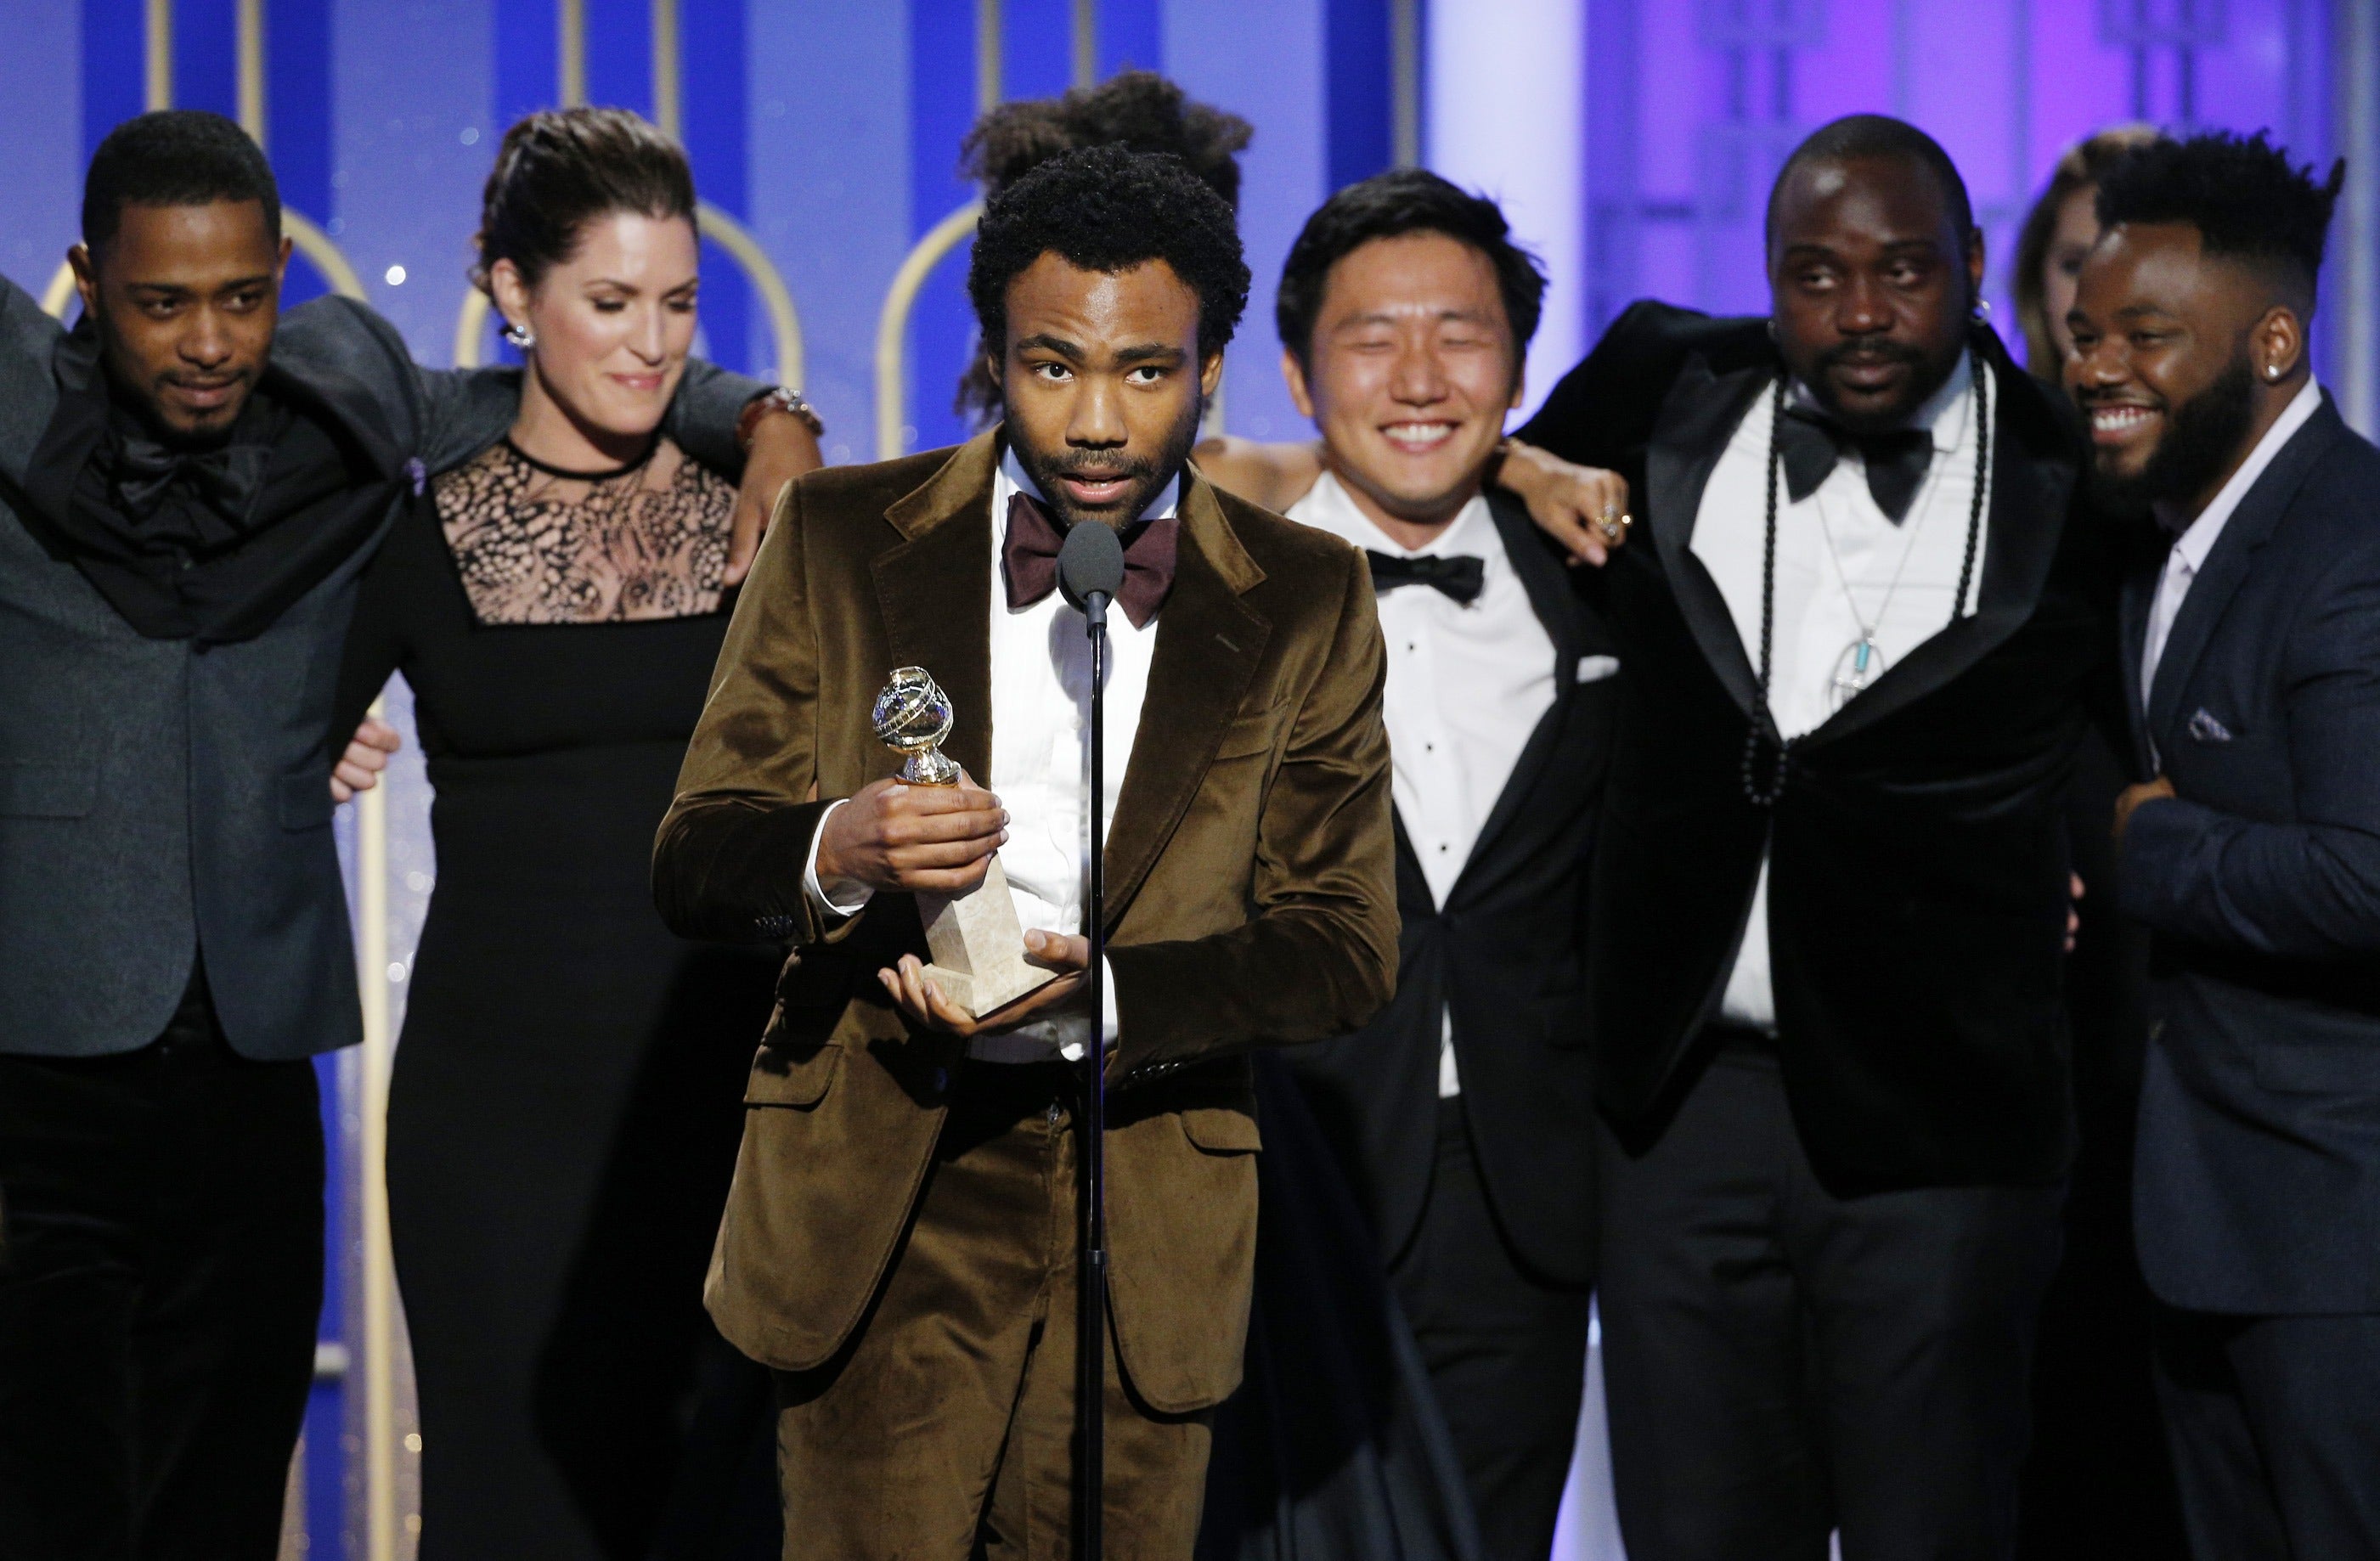 'Atlanta' Will Return With Two New Seasons in 2021